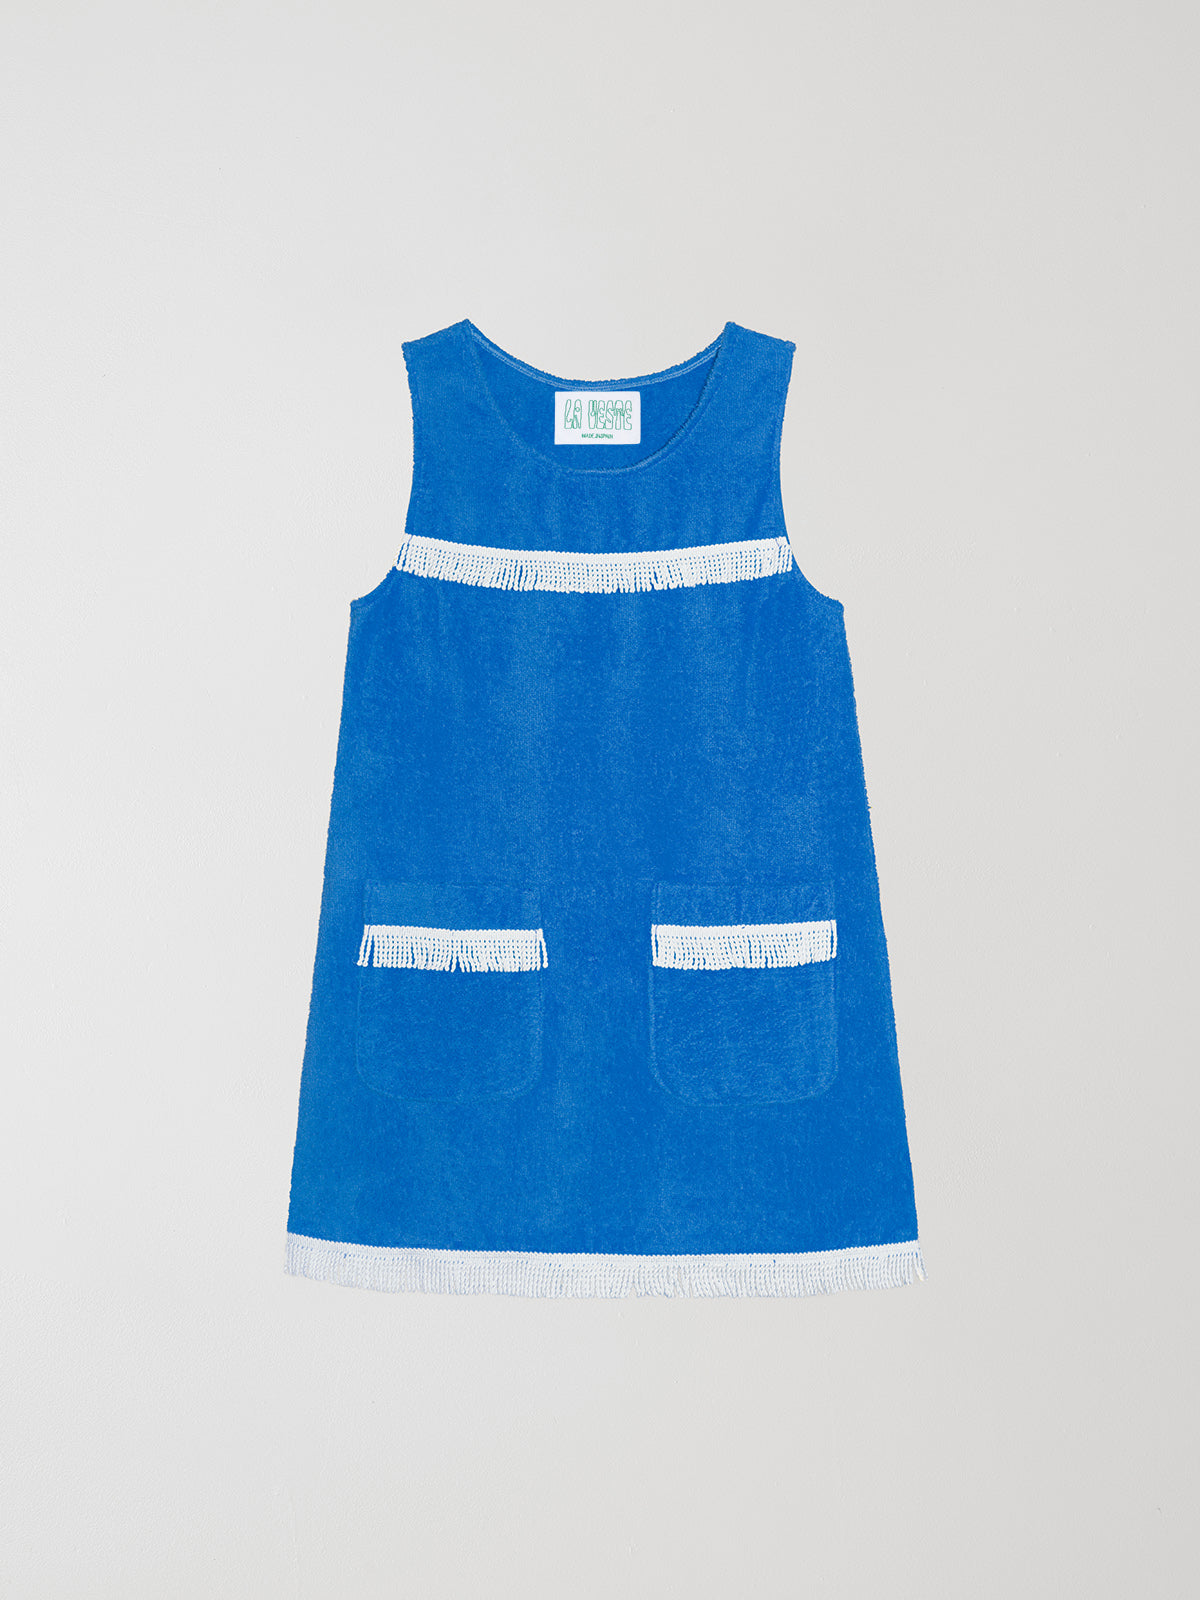 Fringes Mini Towel Blue is a short blue dress with white fringe details on the chest and at the end of the skirt.